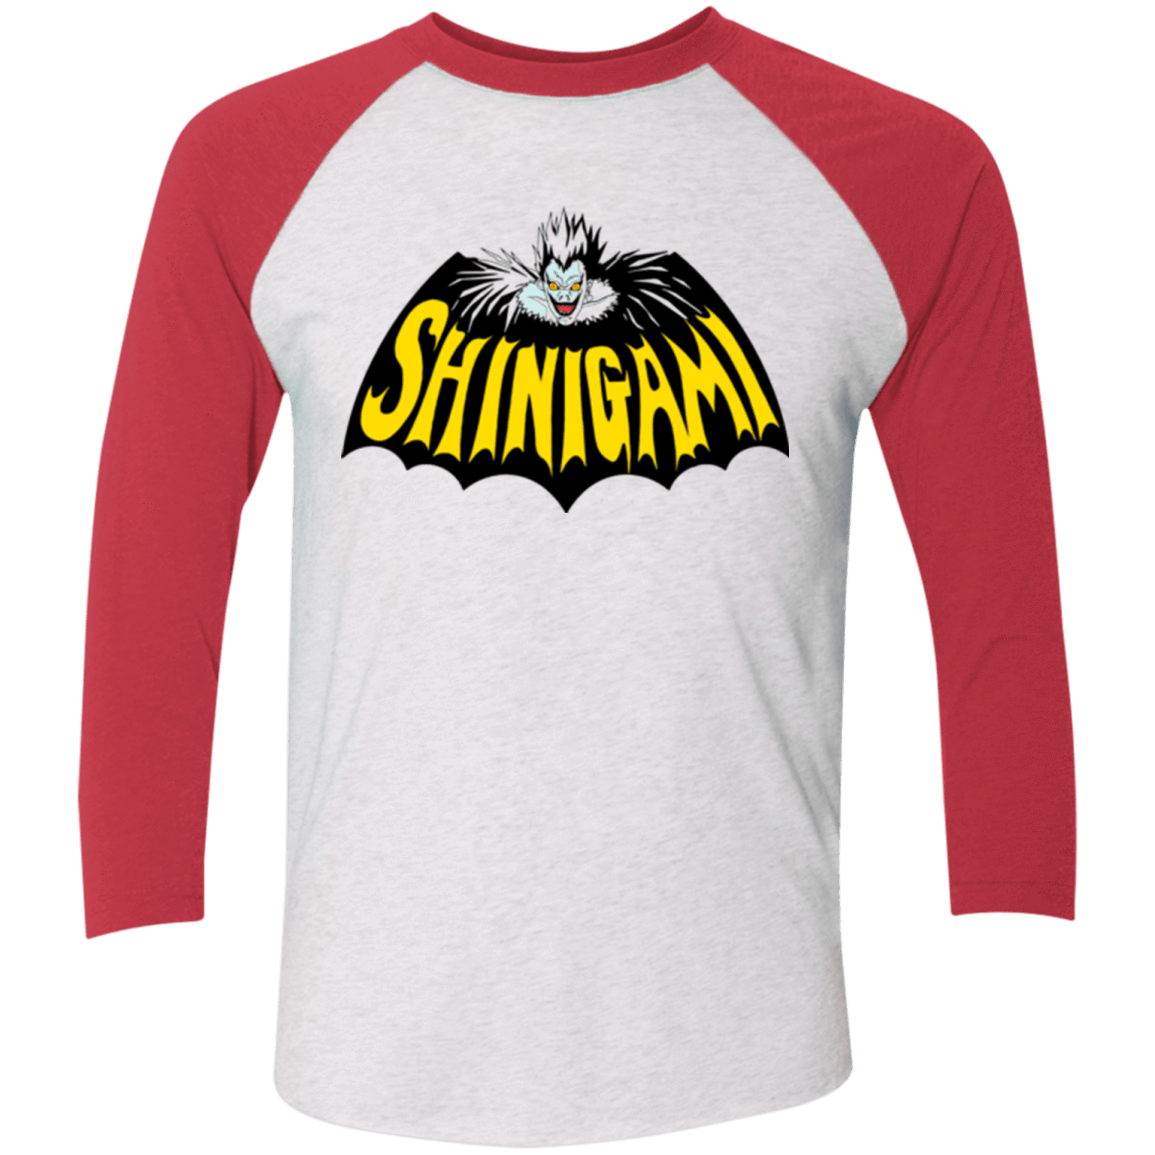 T-Shirts Heather White/Vintage Red / X-Small Bat Shinigami Men's Triblend 3/4 Sleeve